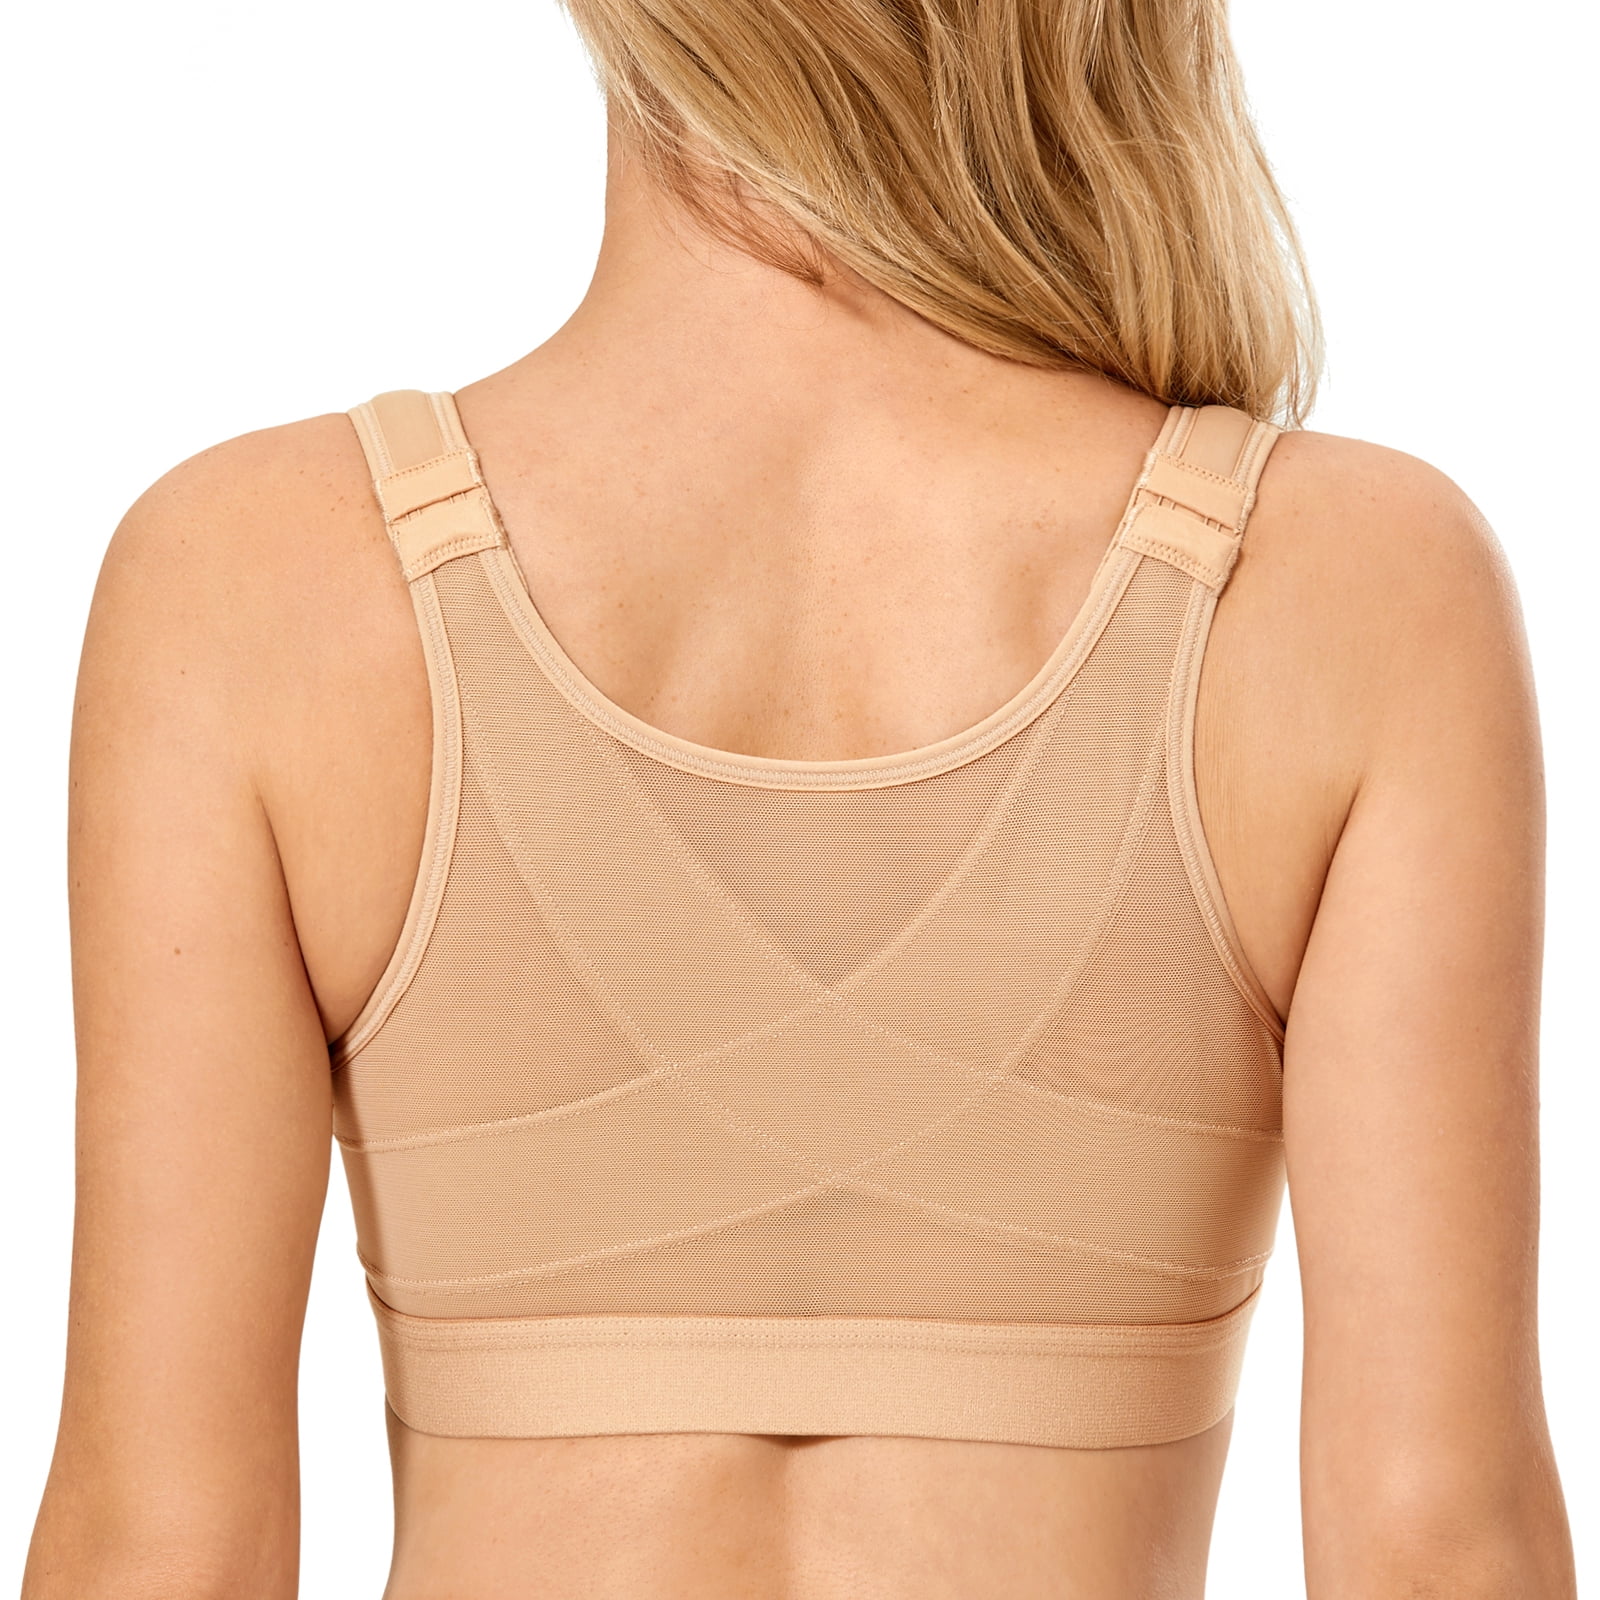 Posture Corrector & Lift Up Multifunctional Bra full coverage and